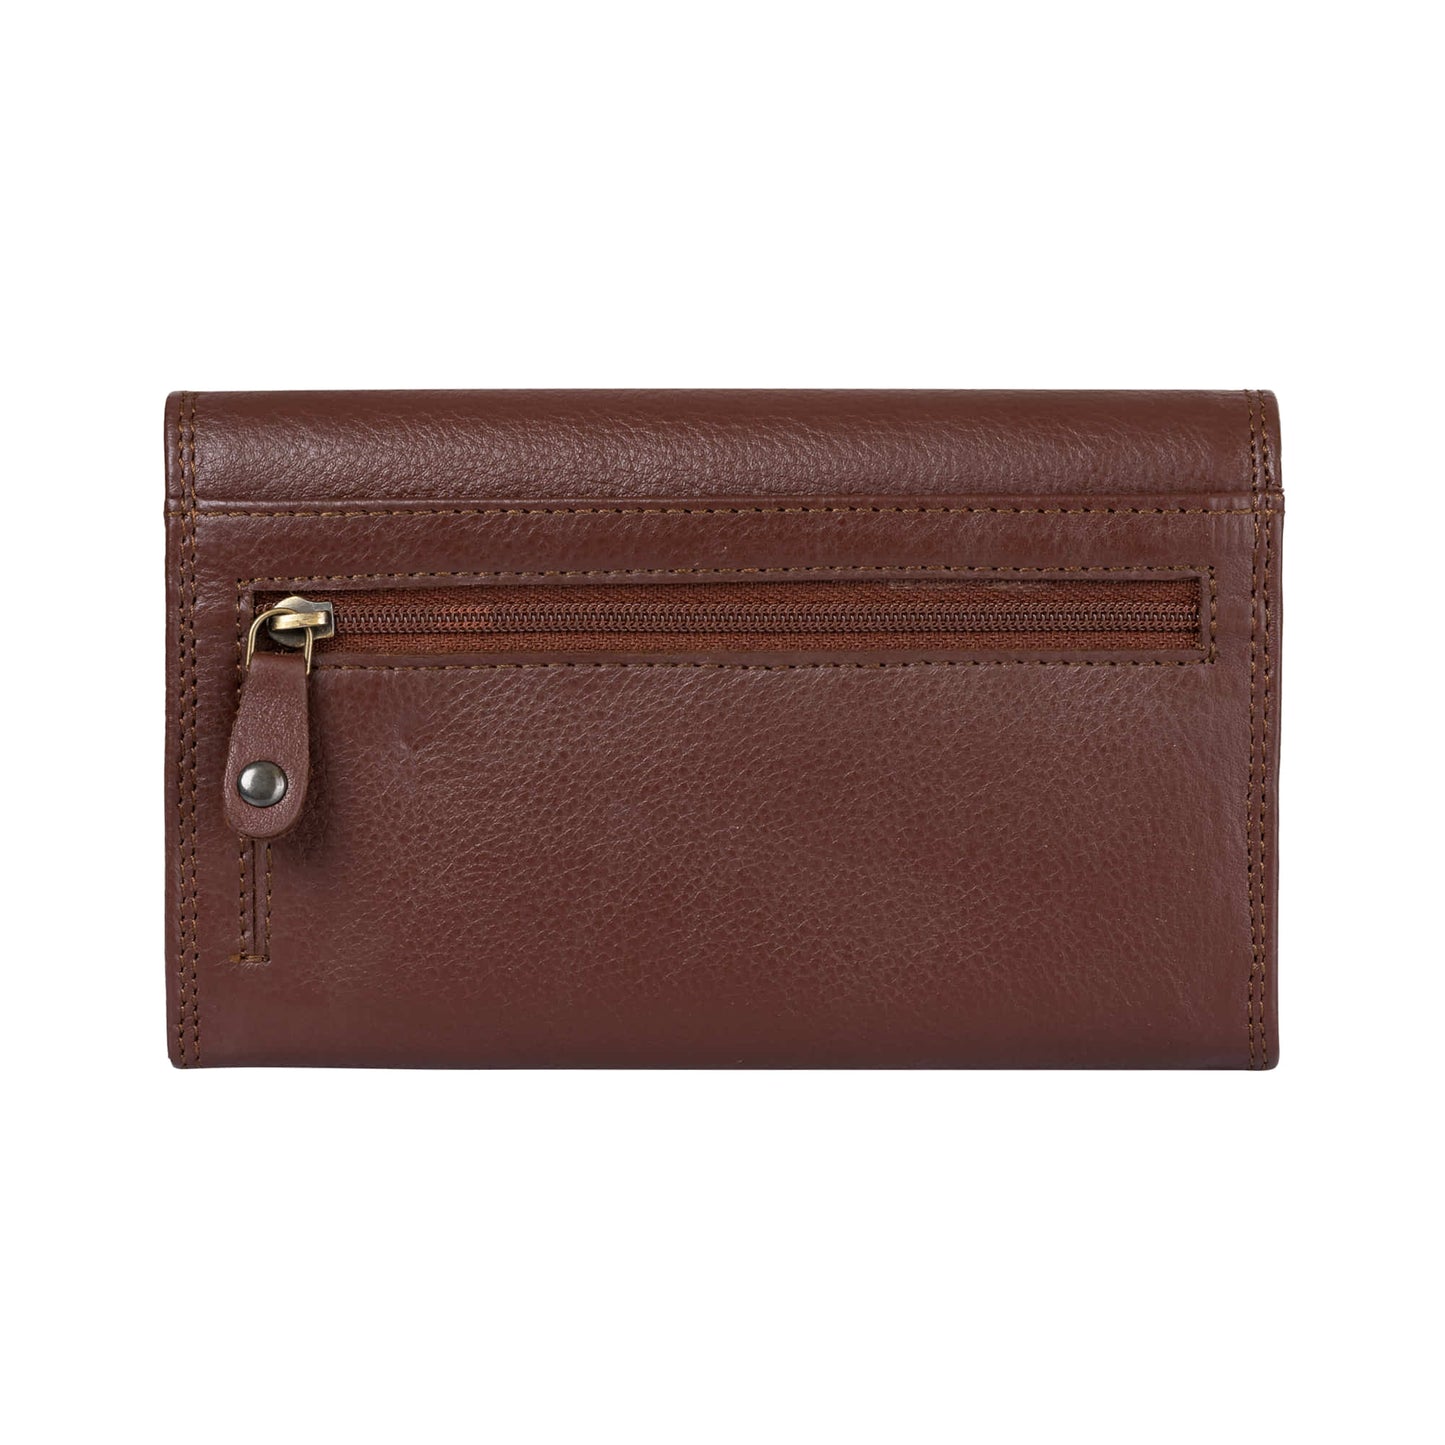 Style n Craft 391102 Ladies Clutch Wallet in Brown Full Grain Leather - Back View Closed